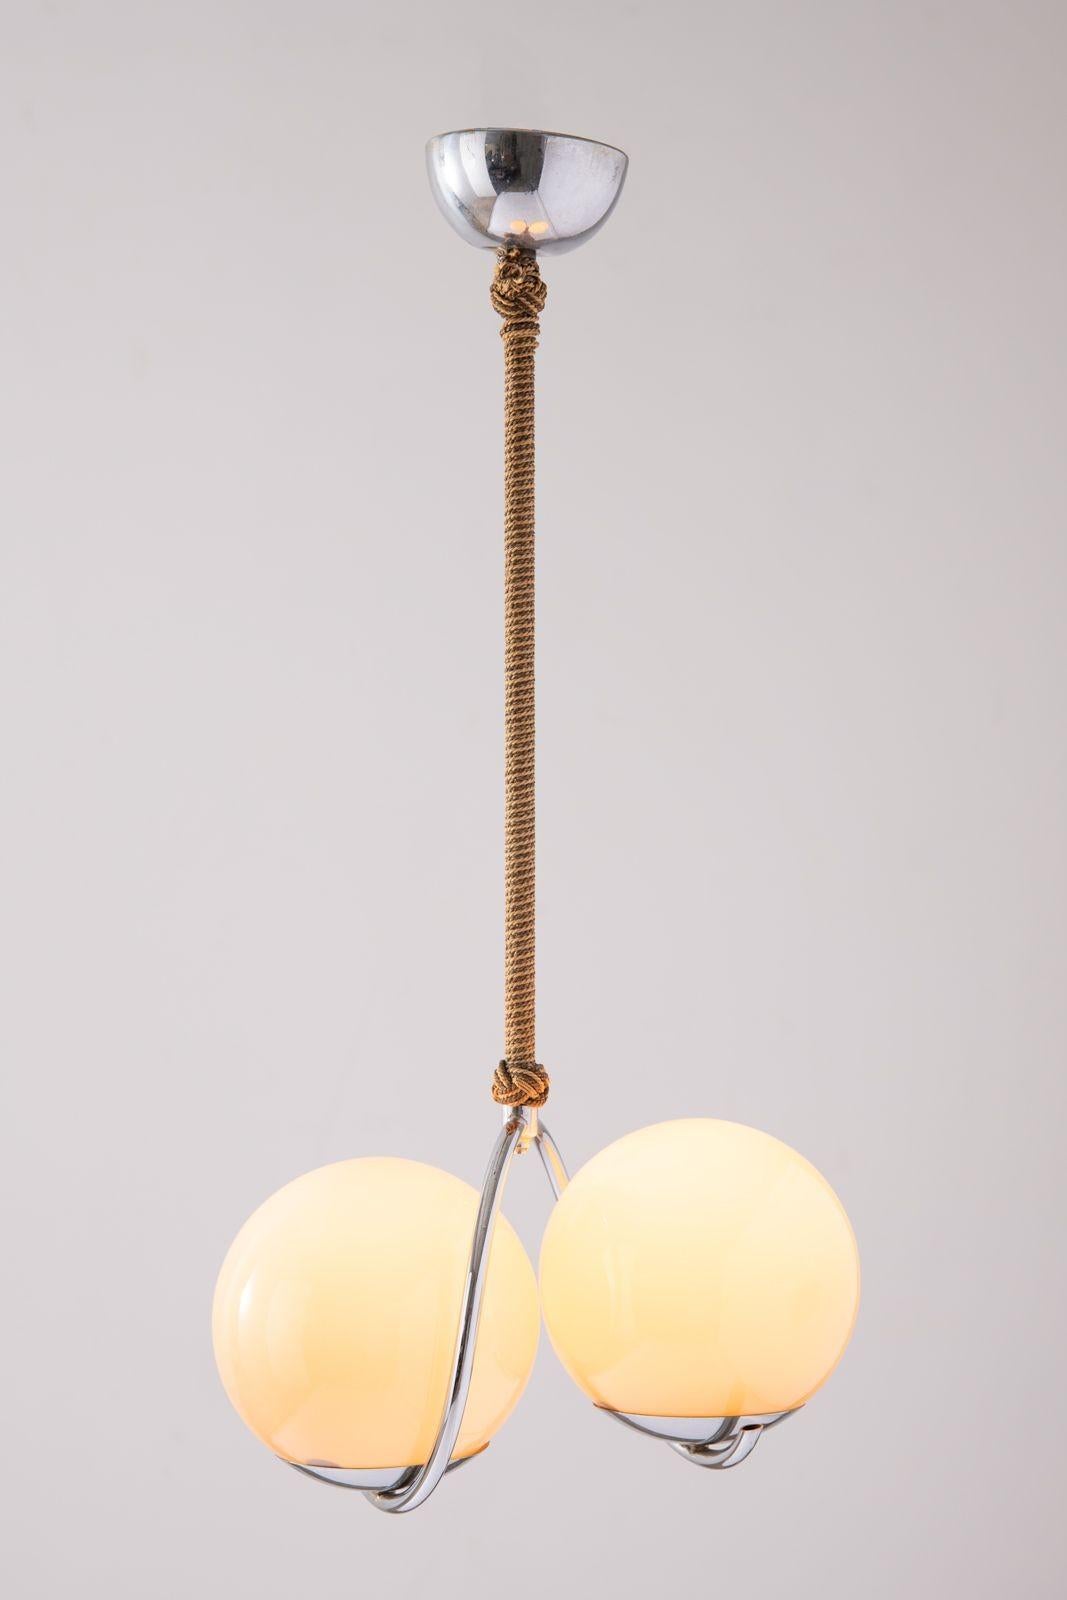 This elegant pendant lamp is very sensual and pleasing to the eye.
It was purchased on a trip to Denmark in the 1960s and is crafted of the highest quality materials. The lamp has been very well preserved. Due to the flesh tone of the glass globes,